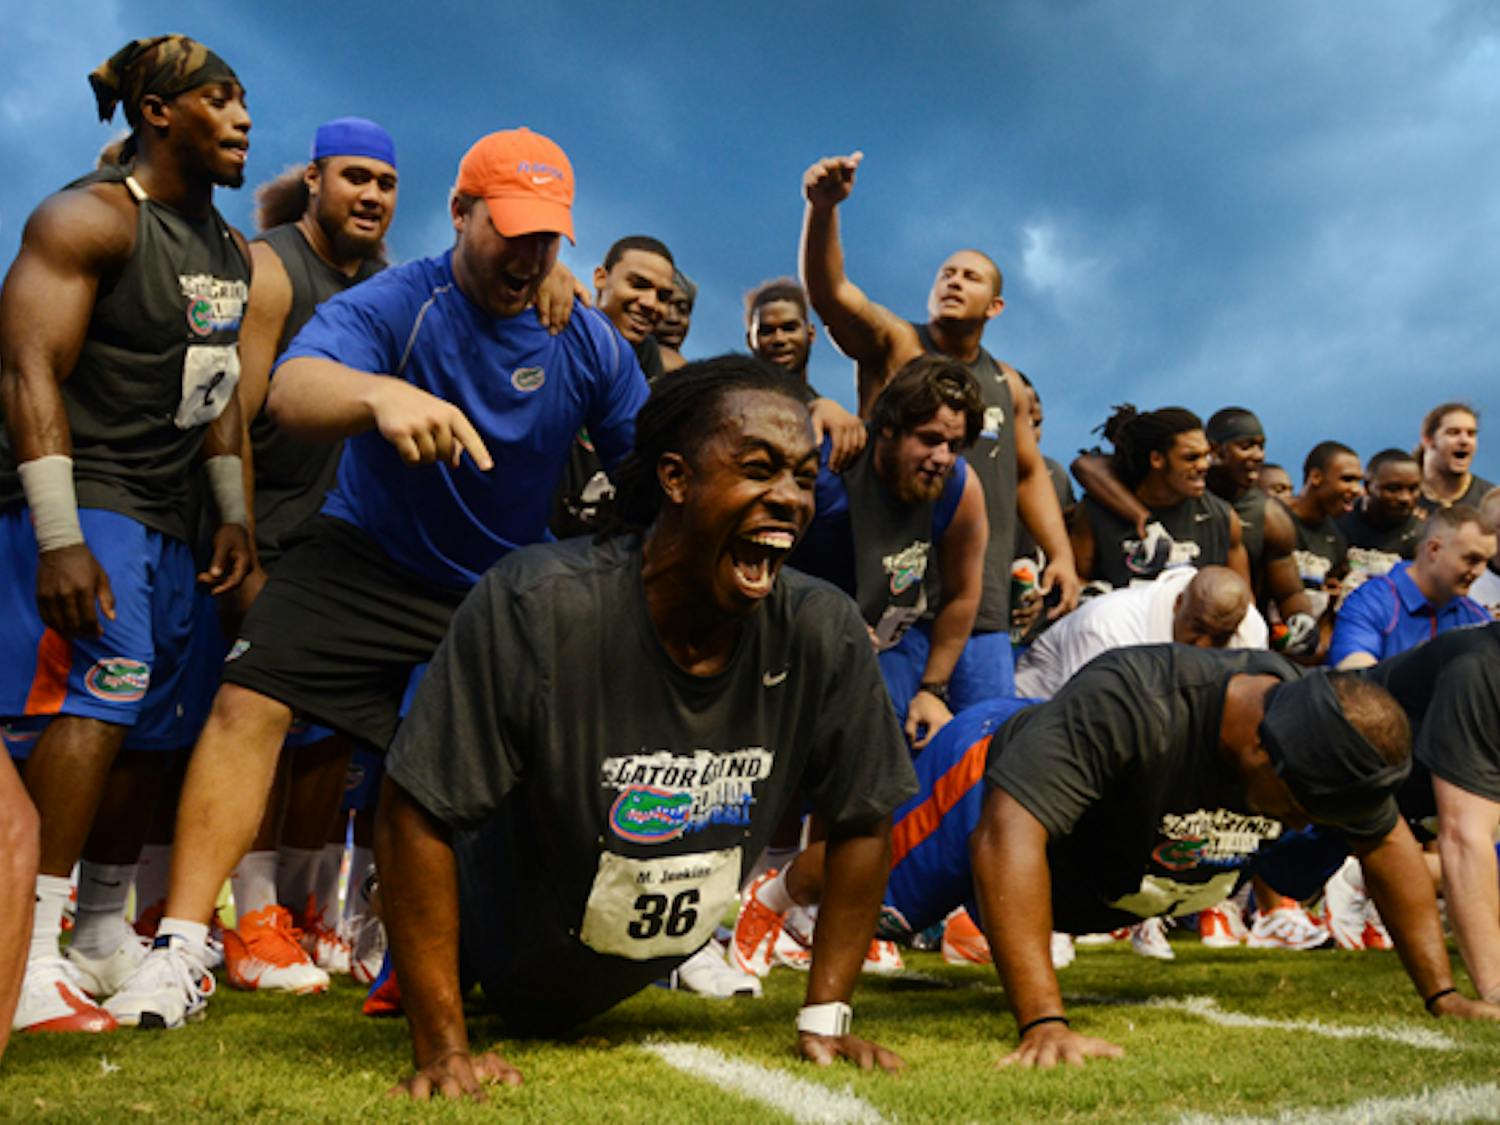 Gator football player Moses Jenkins fights through fatigue during a push-up contest at the fourth annual Gator Charity Challenge at Ben Hill Griffin Stadium on Friday night. The event featured a number of strength and speed competitions and all benefits went to the local chapter of The Salvation Army. Walk-on fullback Jesse Schmitt won the push-up challenge, beating nearly 90 other players; Jenkins made it to the top five.